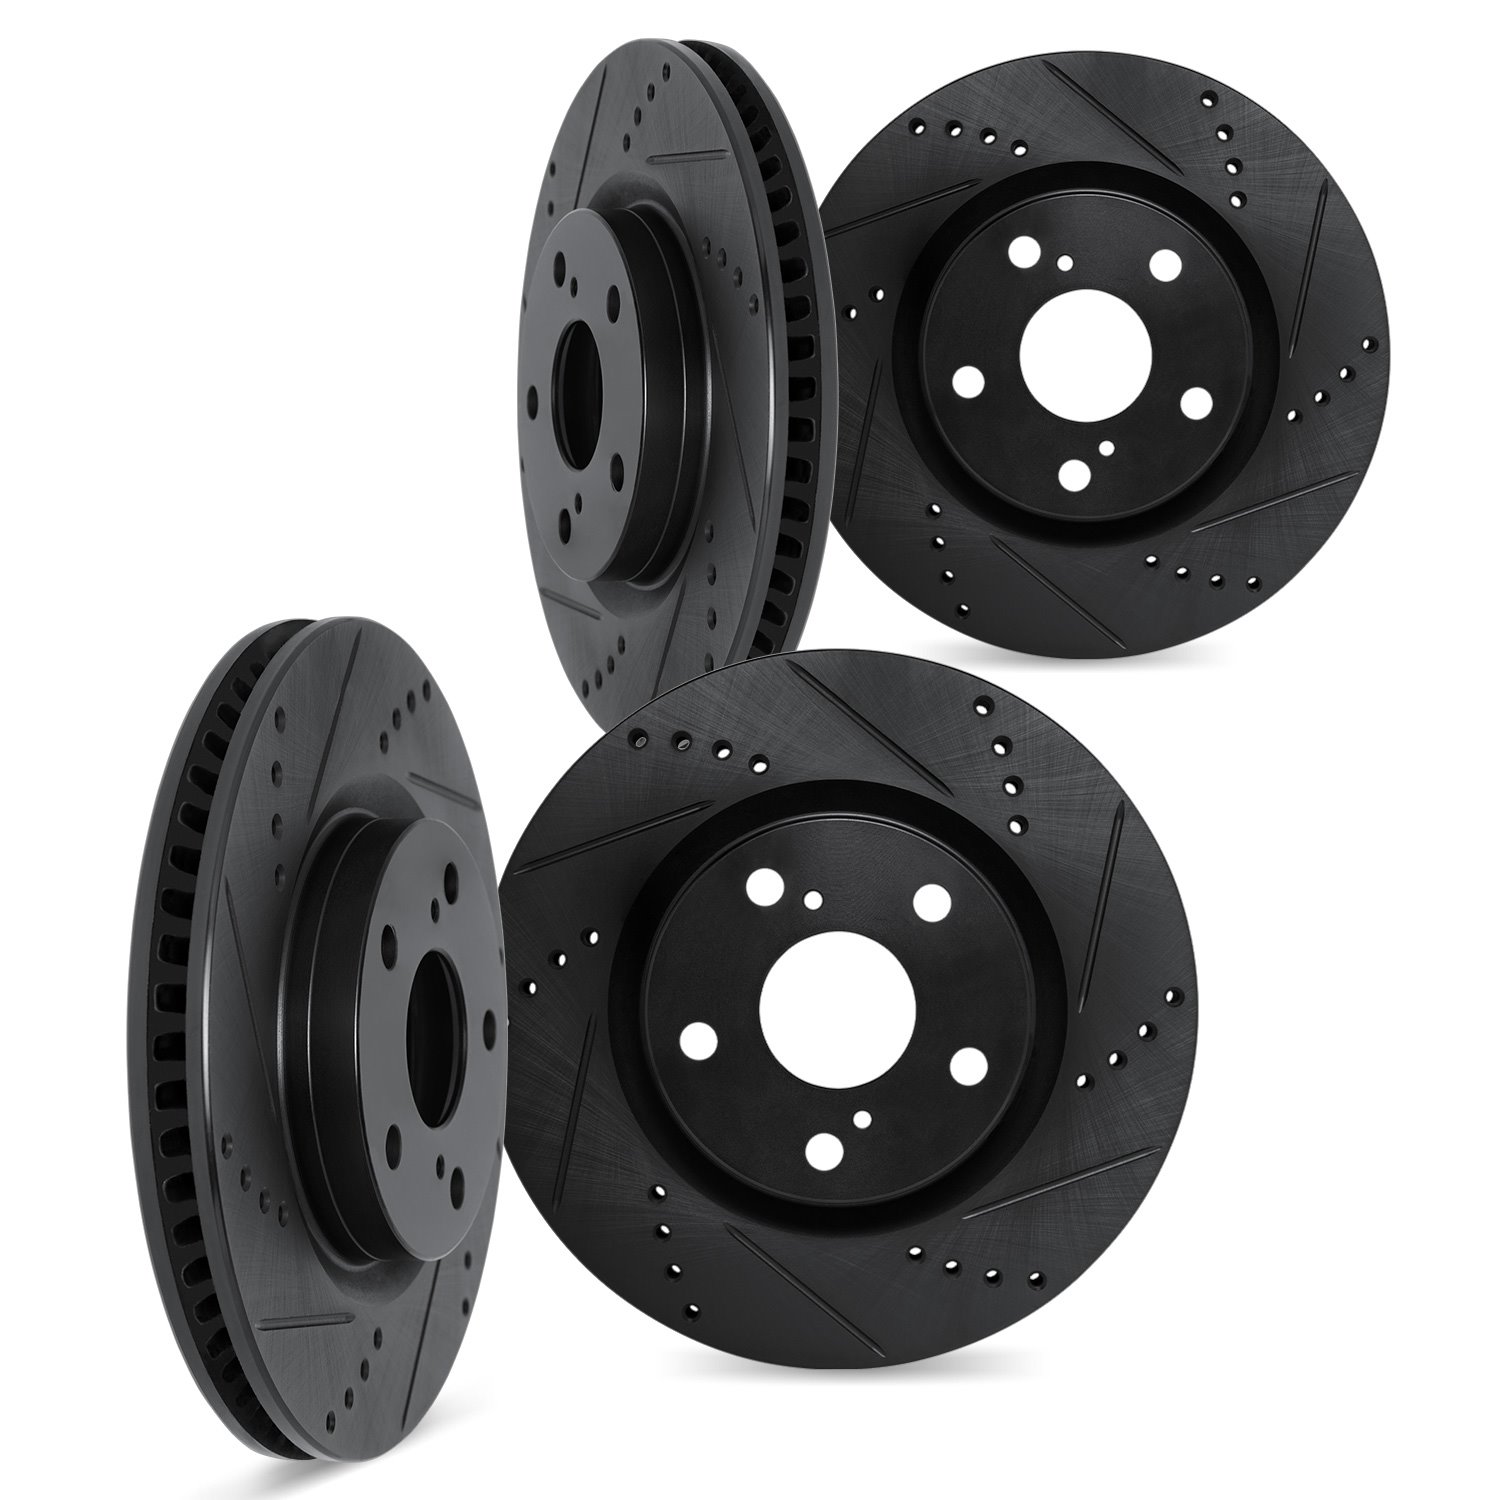 8004-67011 Drilled/Slotted Brake Rotors [Black], 2002-2006 Infiniti/Nissan, Position: Front and Rear